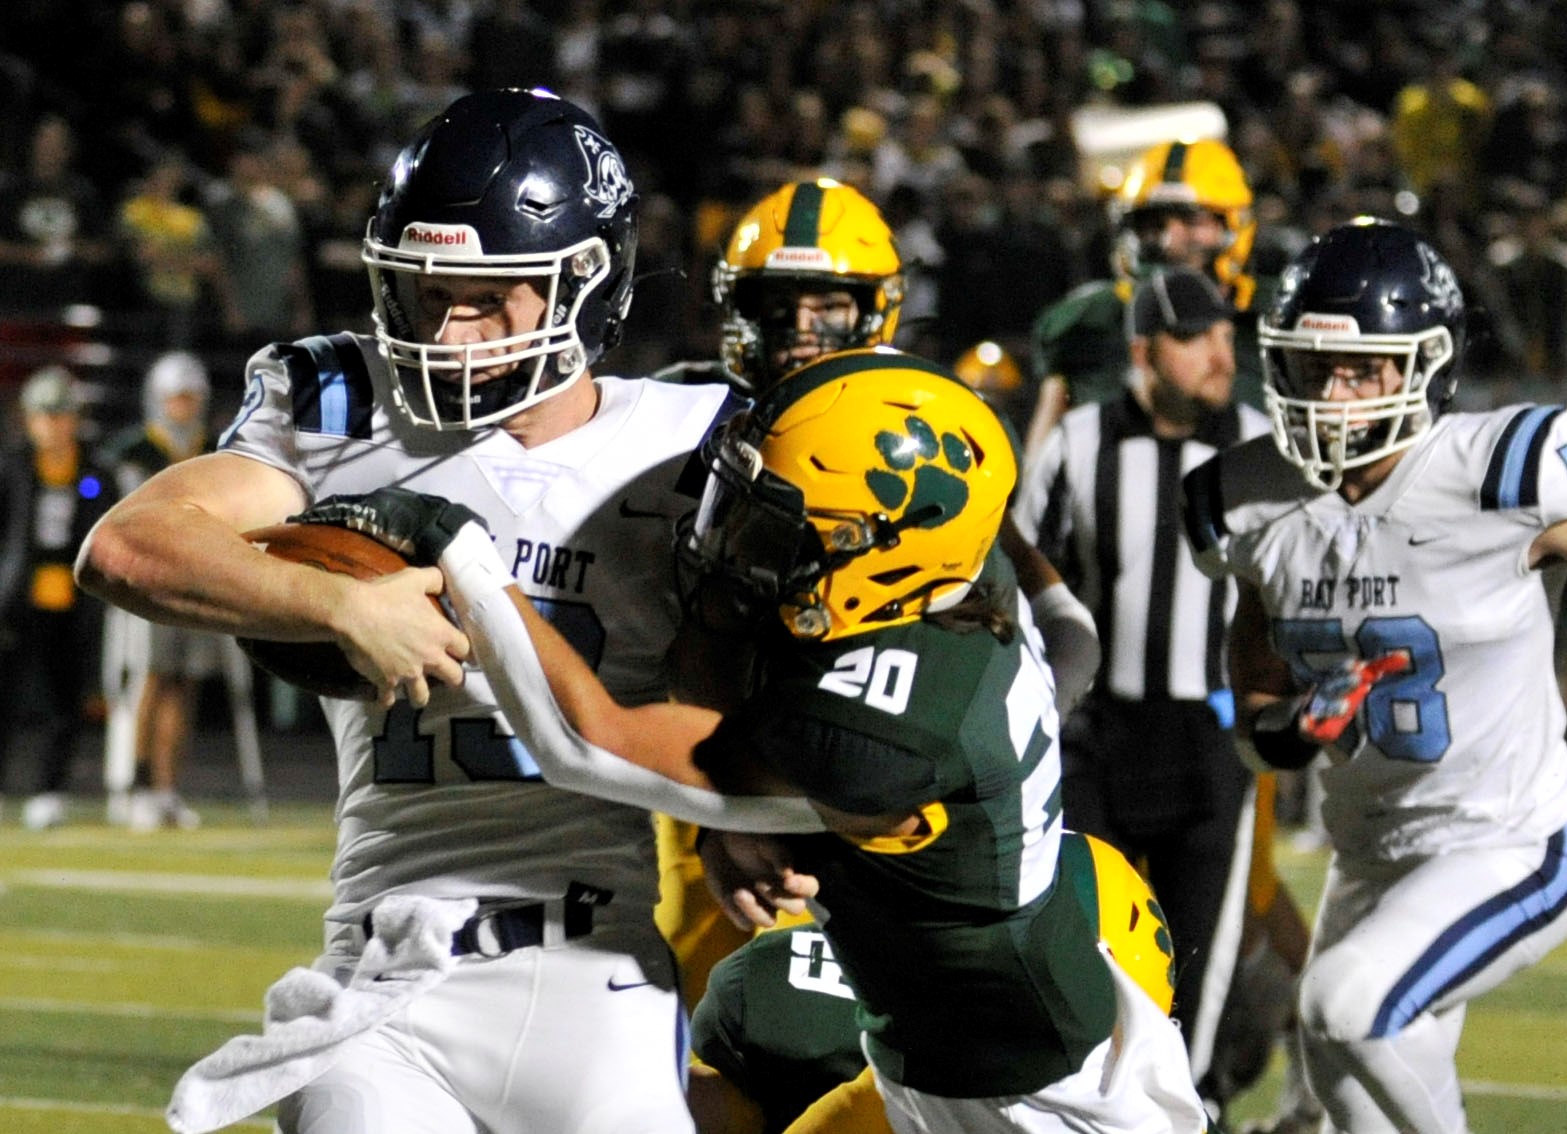 FRIDAY’S SHOWDOWN, BAY PORT VS. WEST DE PERE: From Bay Port’s perspective